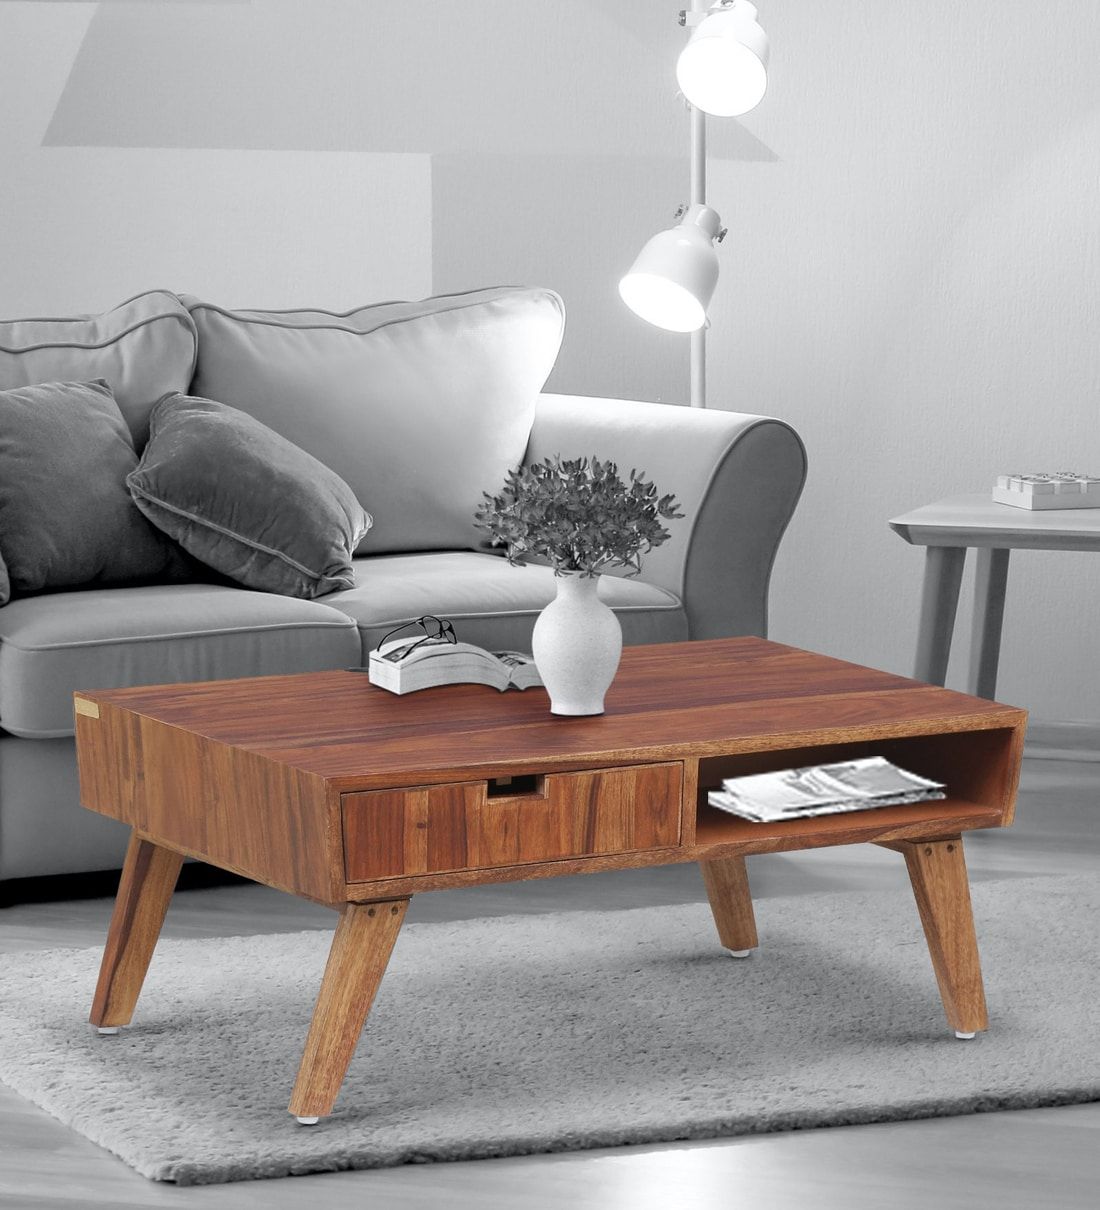 Buy Paloma Sheesham Wood Coffee Table In Rustic Teak Finish Intended For Wooden Mid Century Coffee Tables (View 7 of 20)